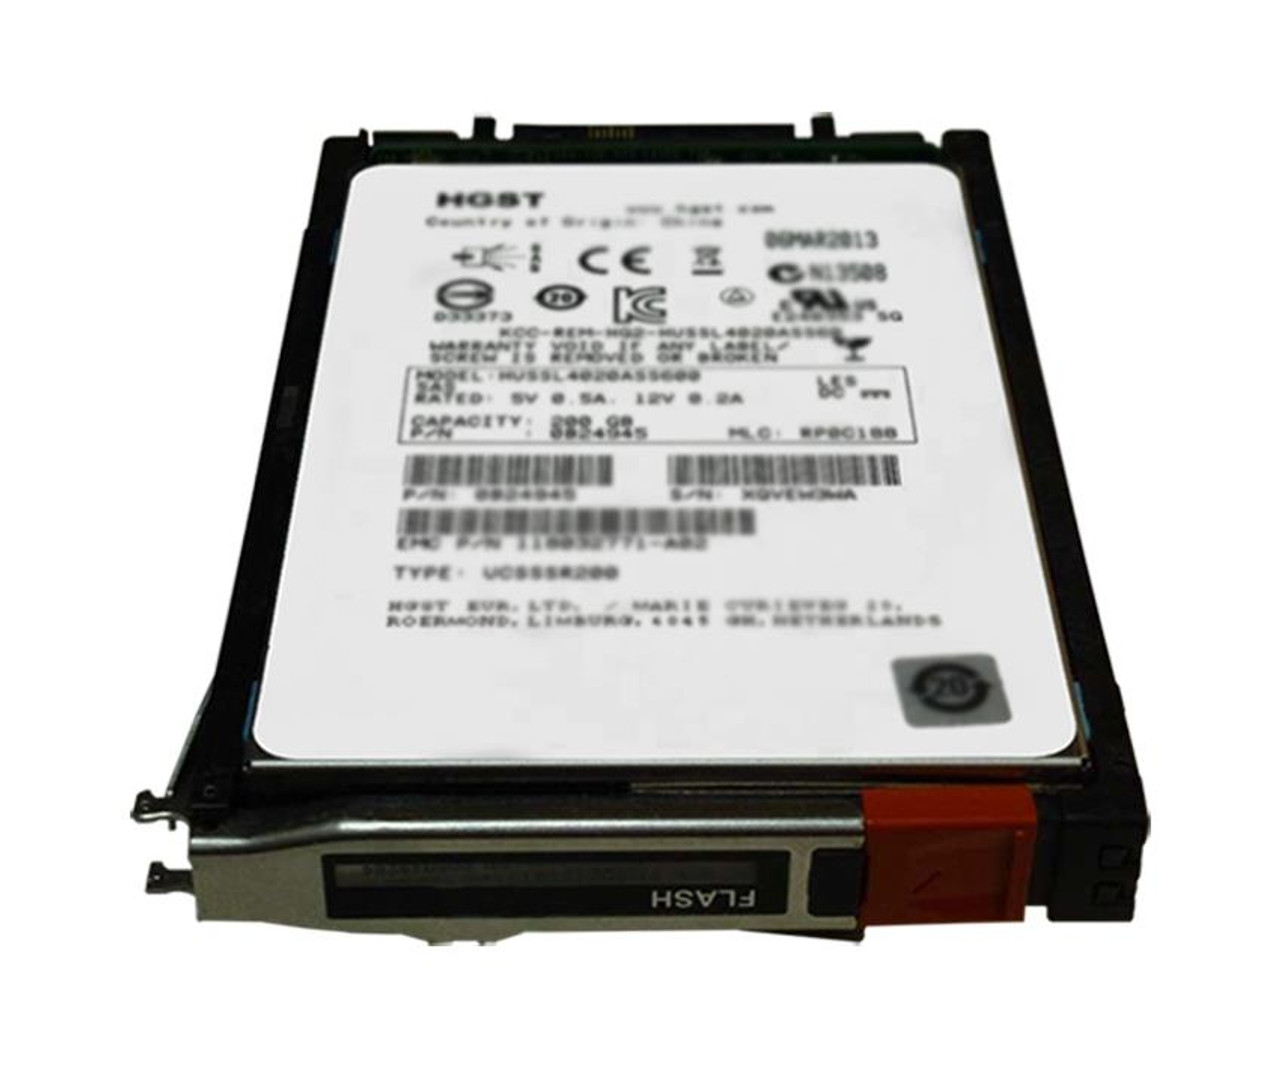 V4-2S6F-200TU EMC 200GB SAS 6Gbps 2.5-inch Internal Solid State Drive (SSD) Upgrade for VNX 25 x 2.5 Enclosure